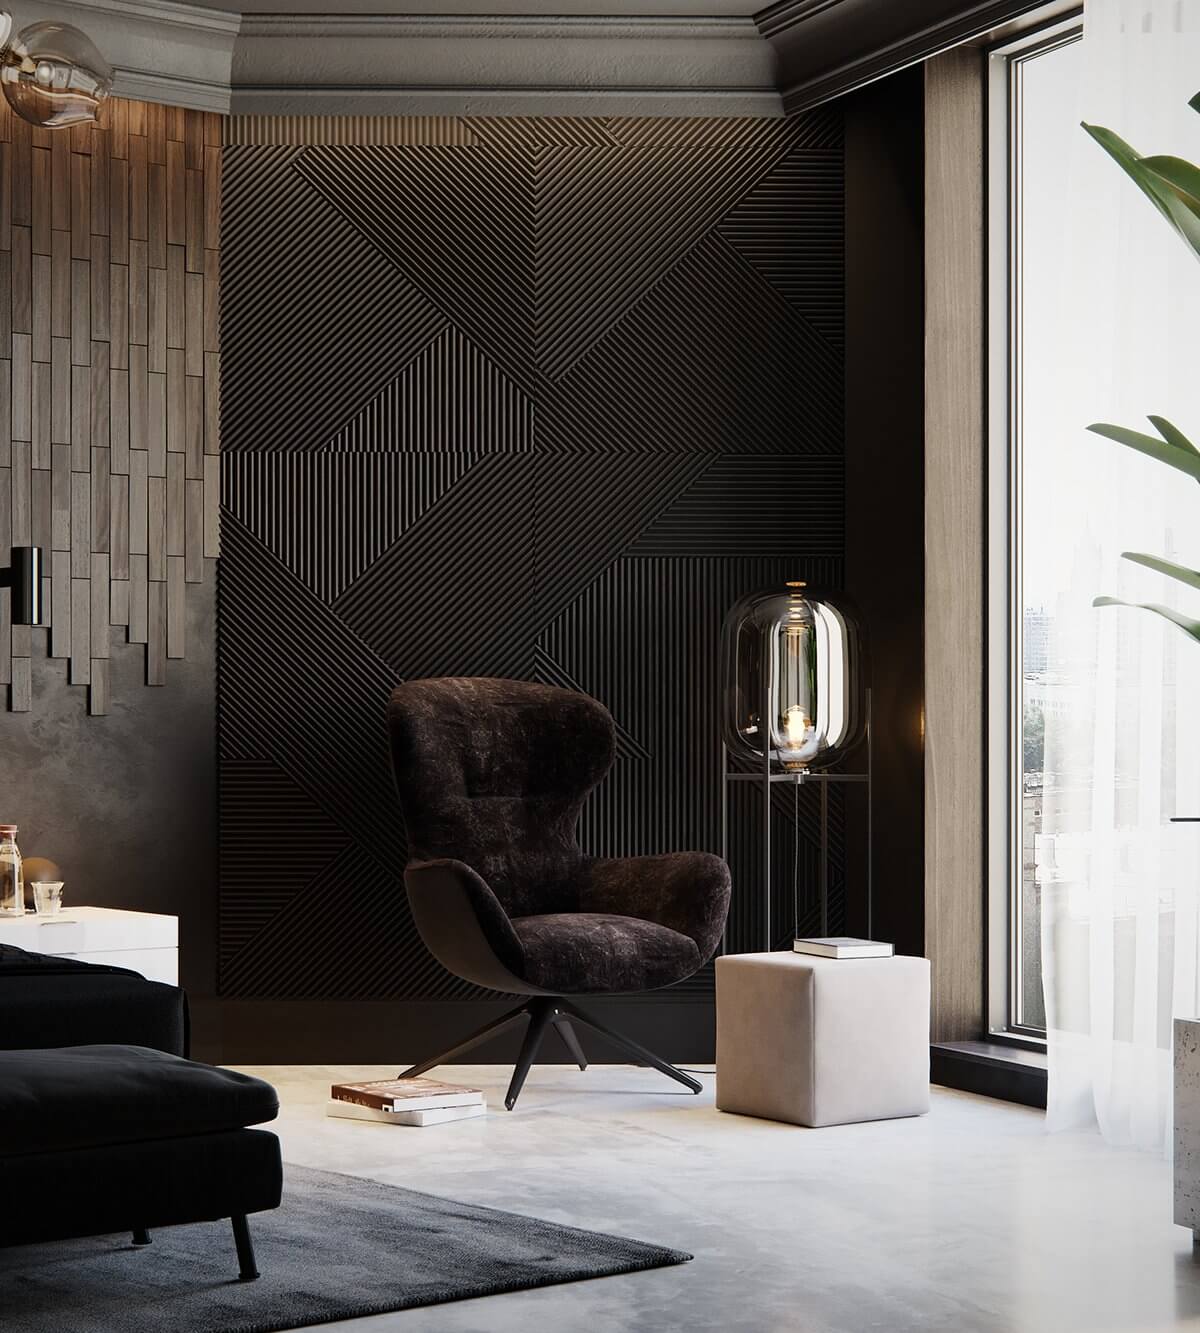 Moscow apartment bedroom chair - cgi visualization